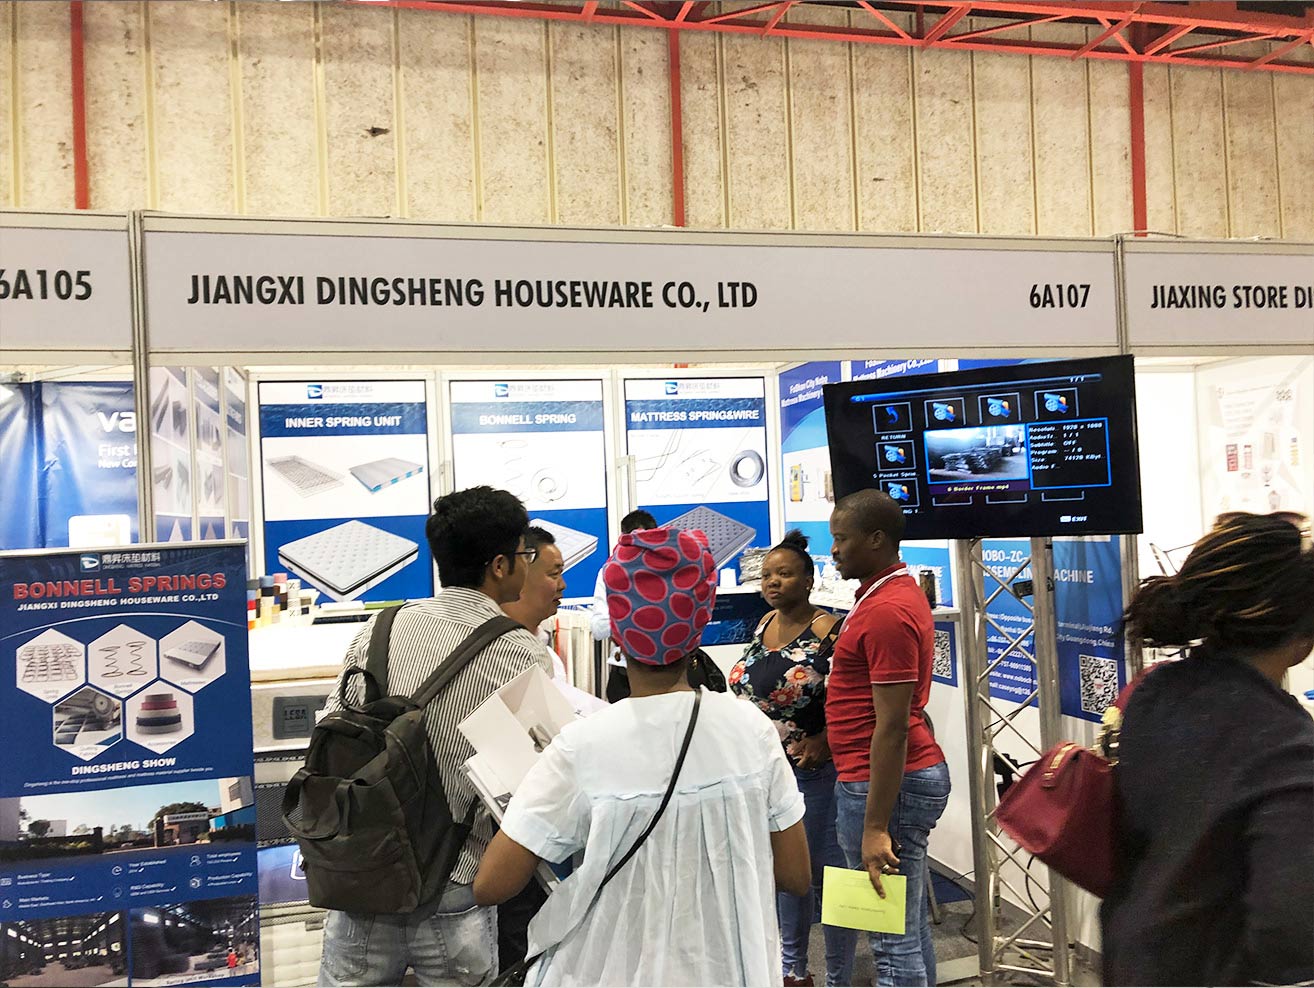 South Africa exhibition in September 2019